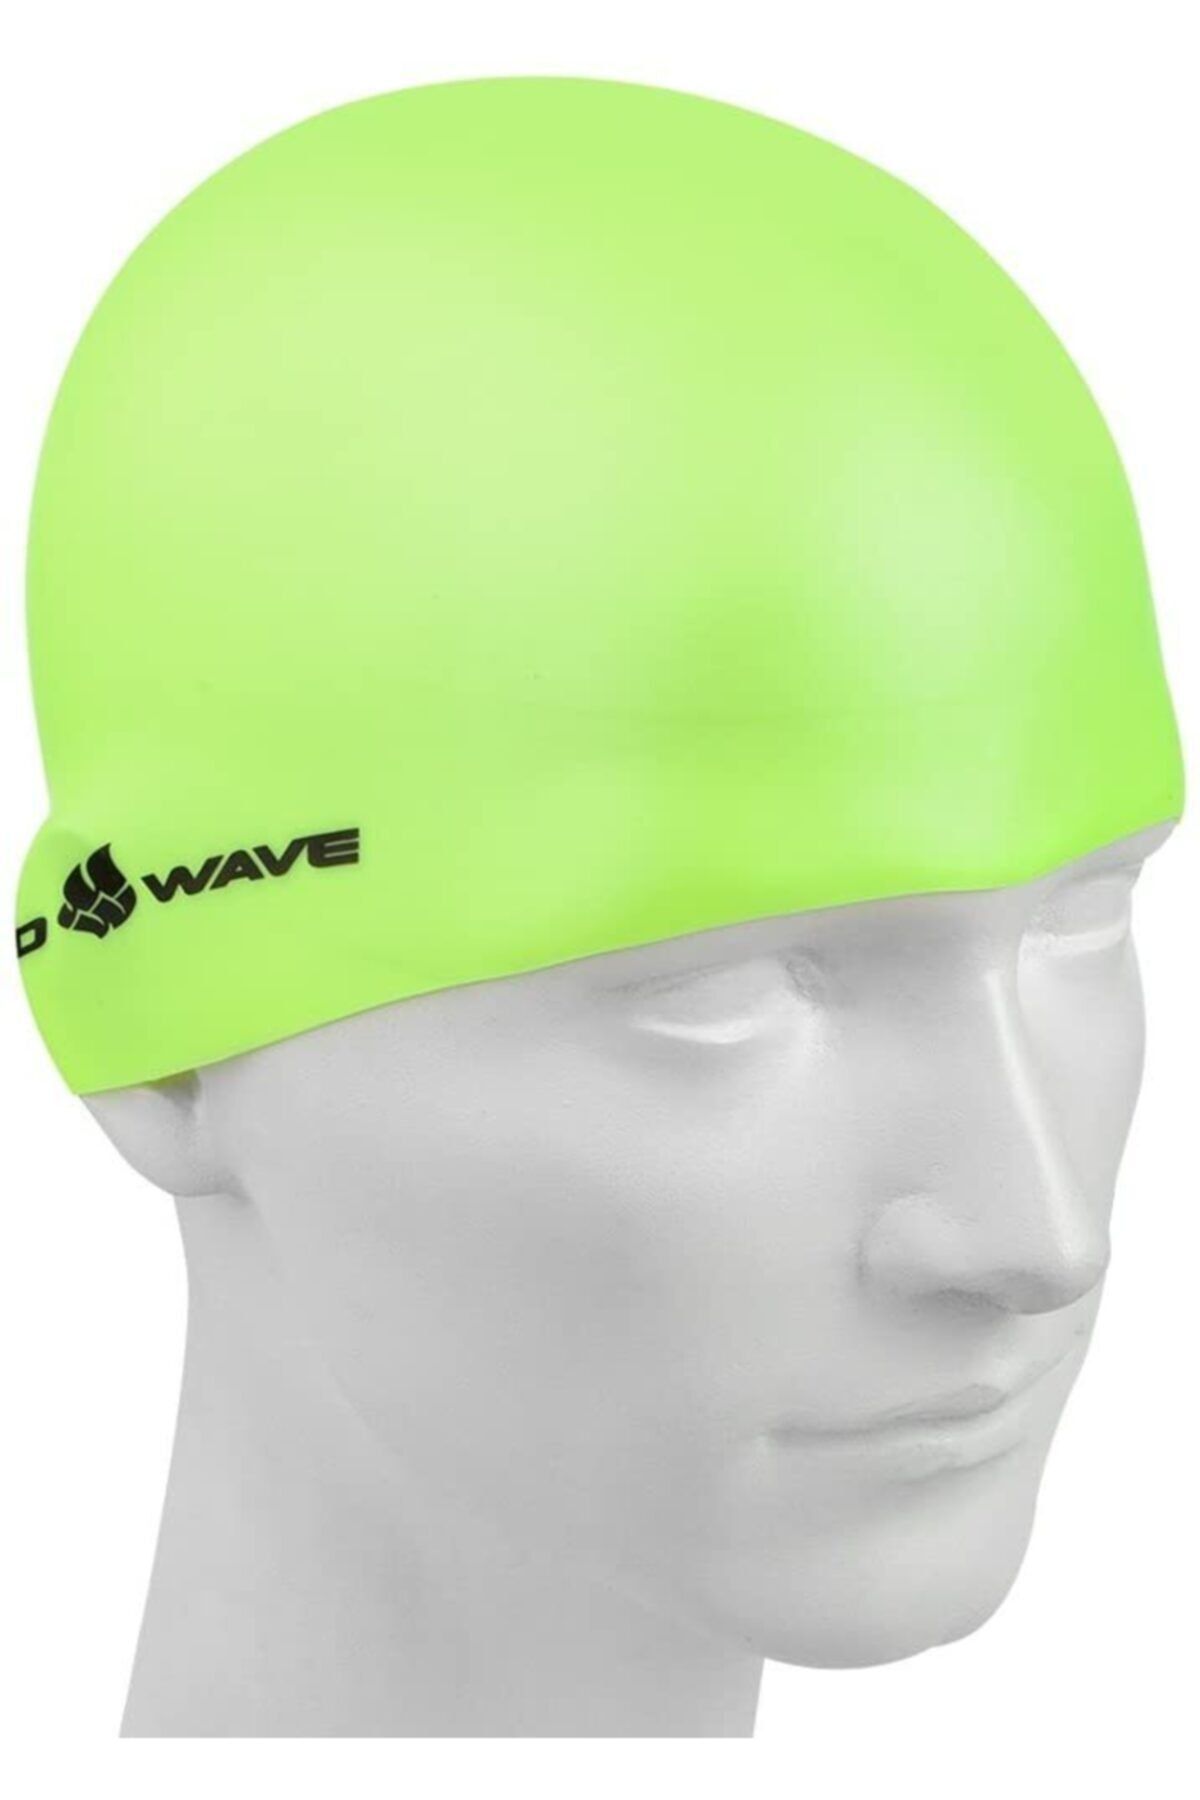 Mad Wave Silicone Cap Light Bıg Yellow Big Size